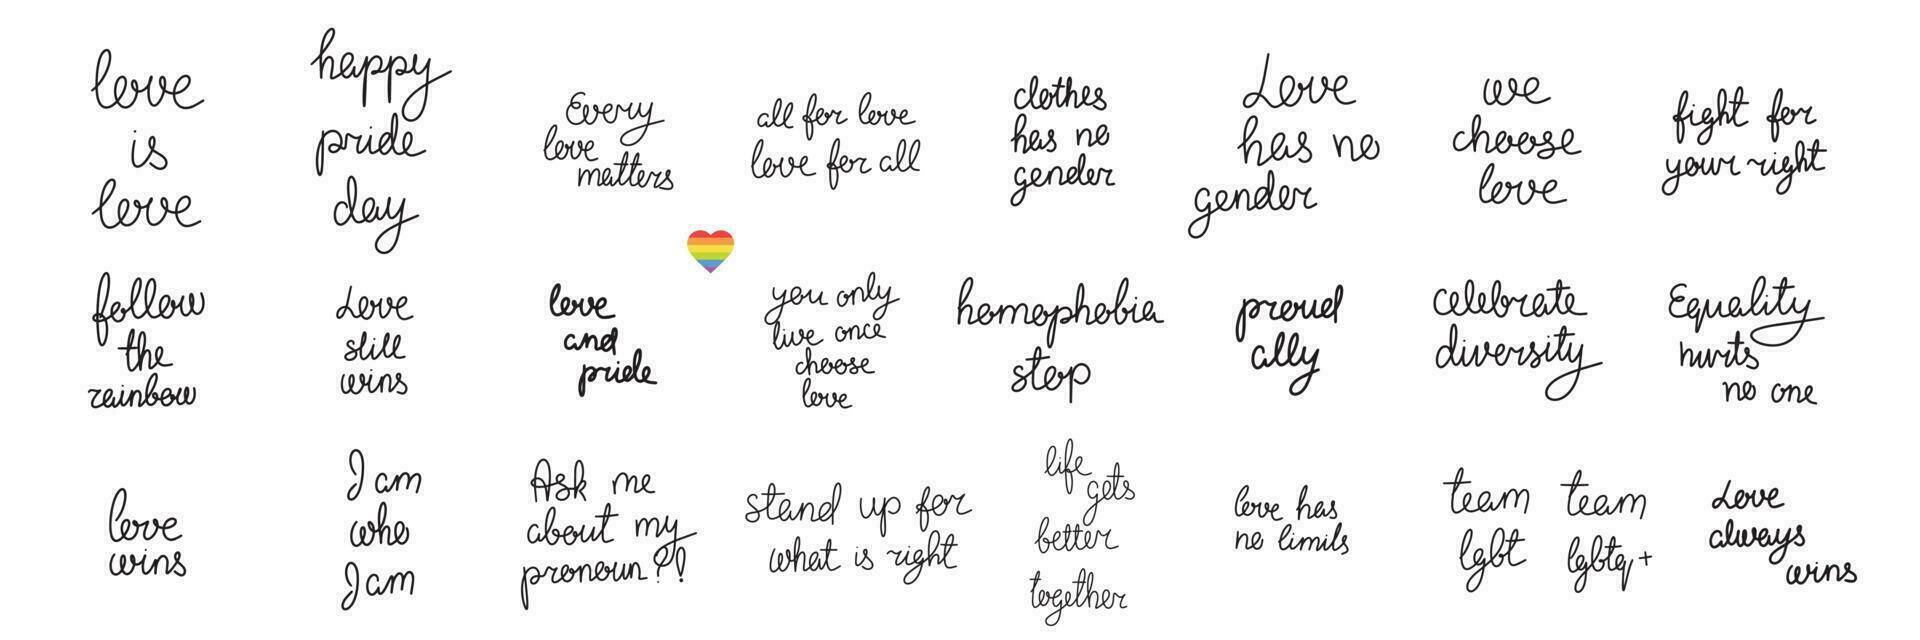 LGBT lettering vector illustration set. Concept for pride community. Happy Pride day, Love ia Love hand drawn modern lettering saying without rainbow. Festival slogan. Design for flyer, card, banner.